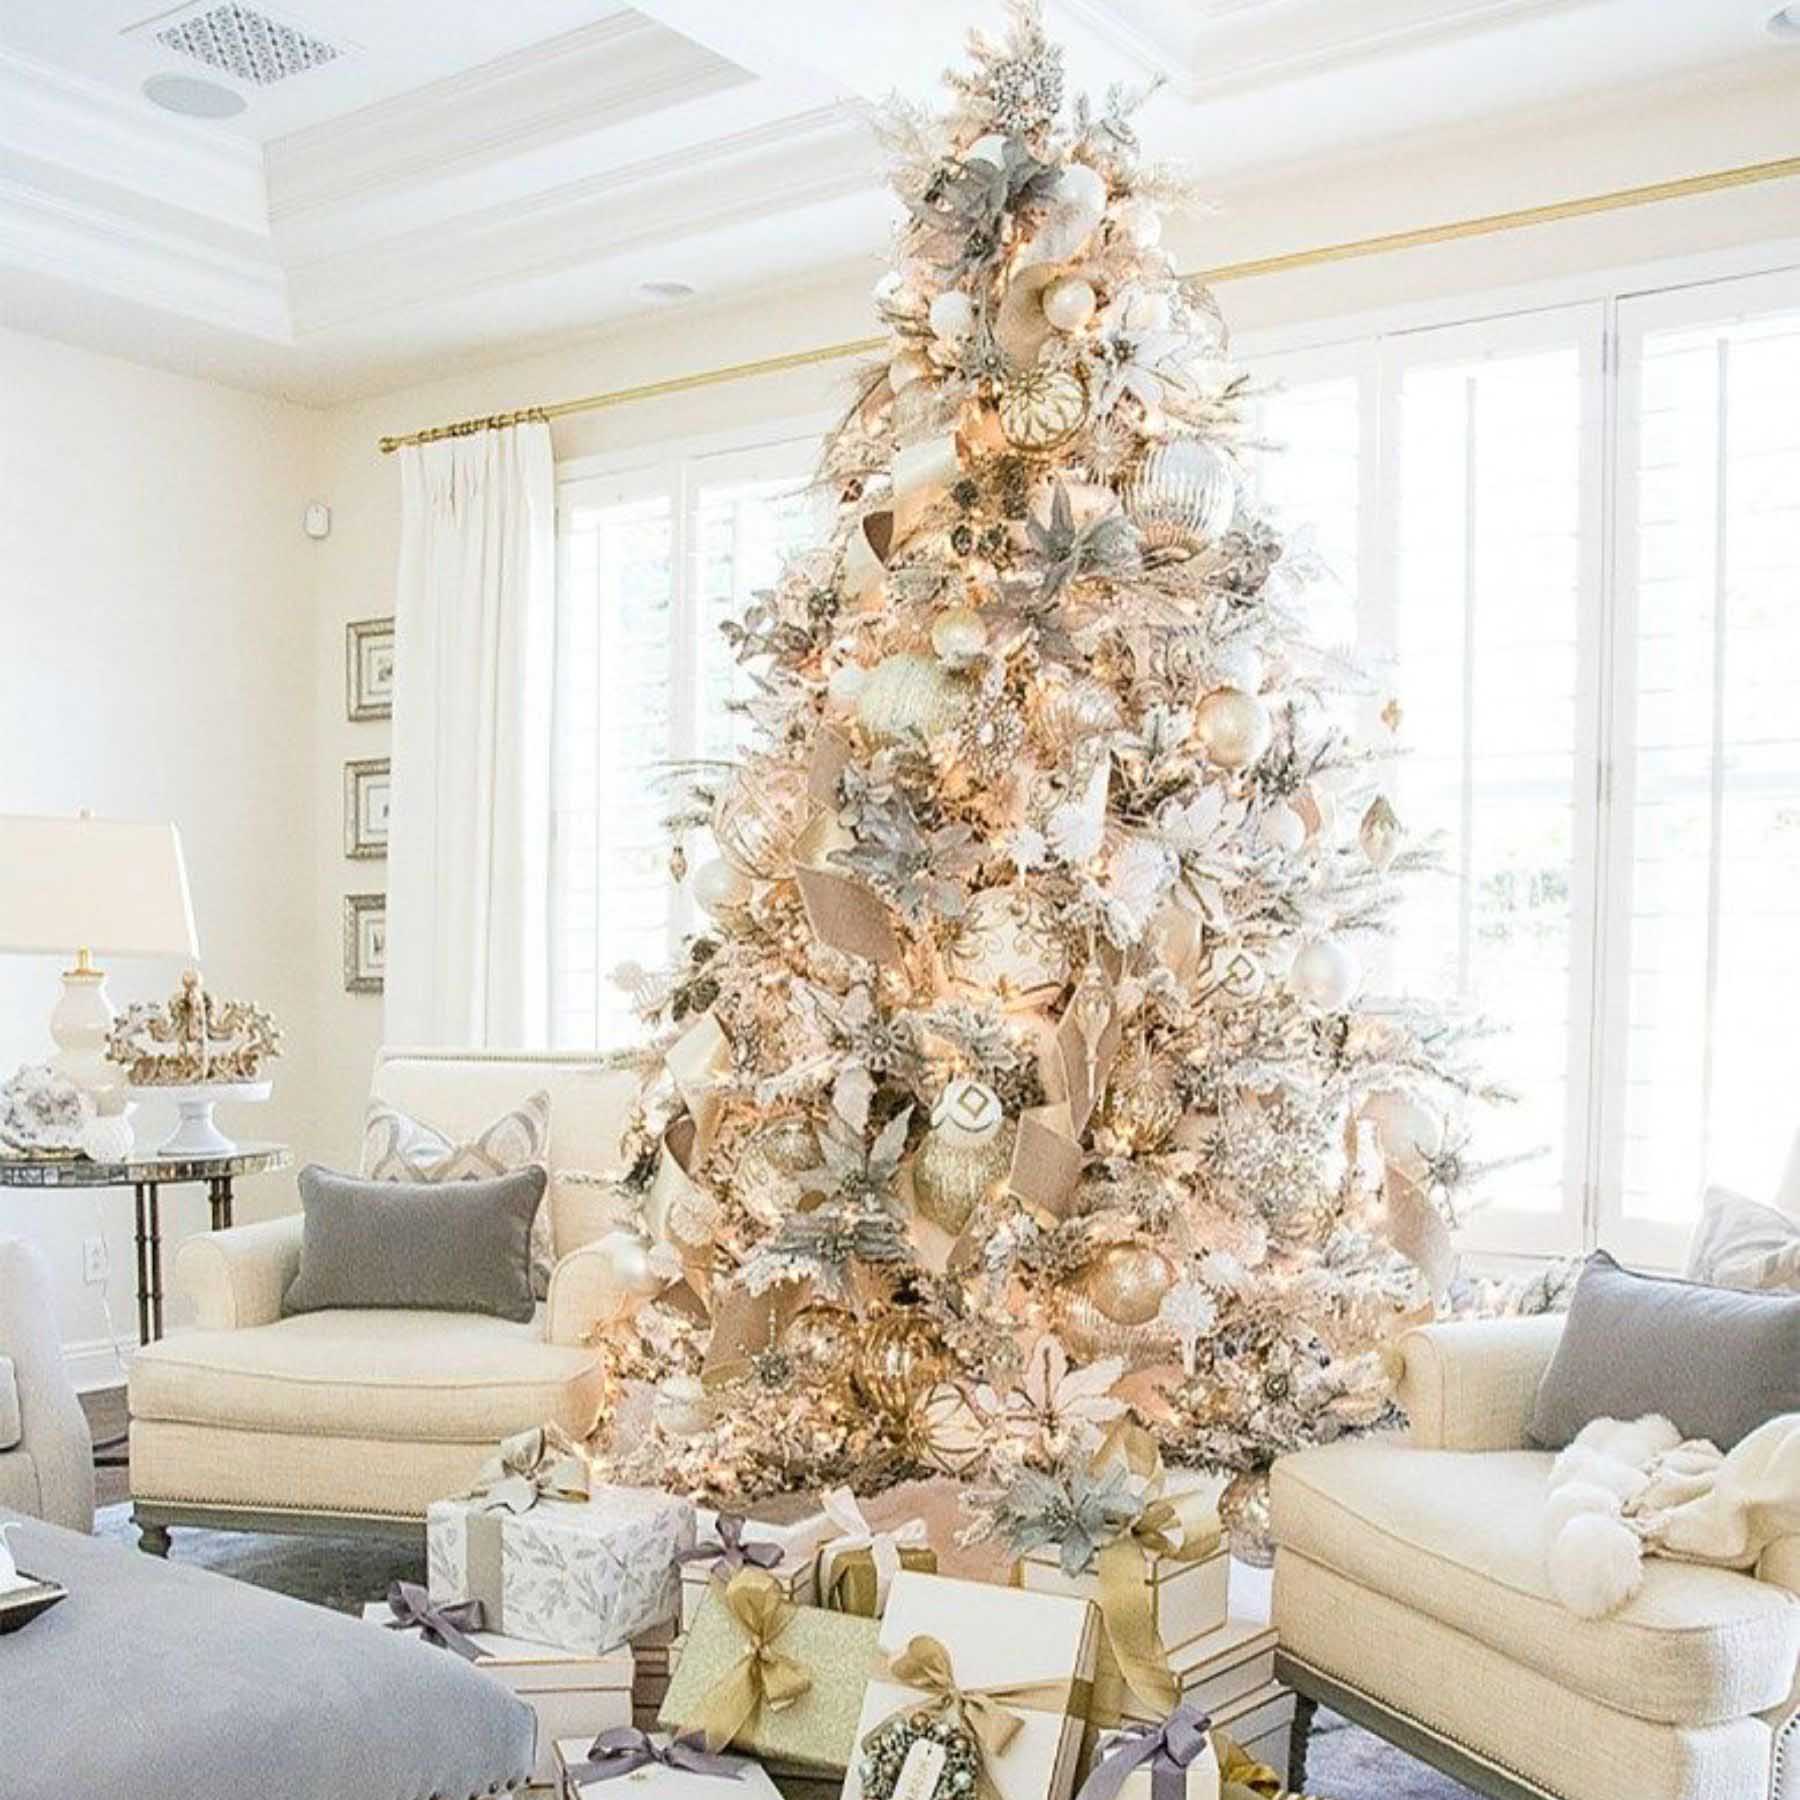 embrace the latest trend by giving your christmas tree a fresh new look